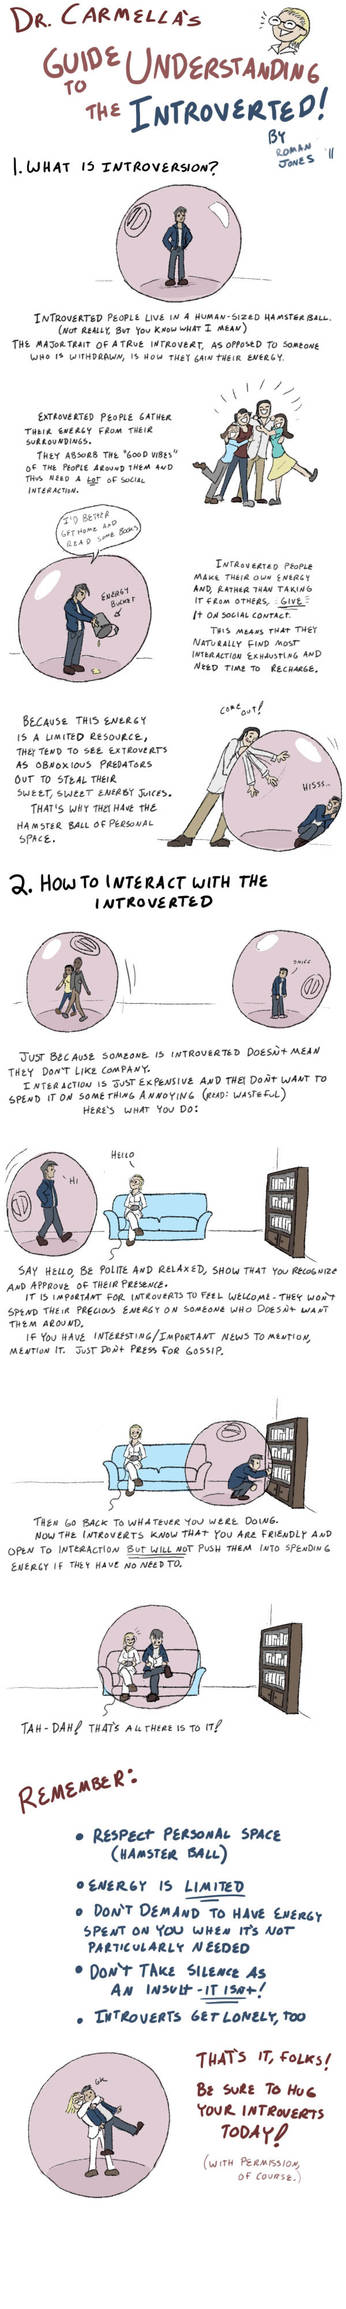 How to Live with Introverts (PDF available!)